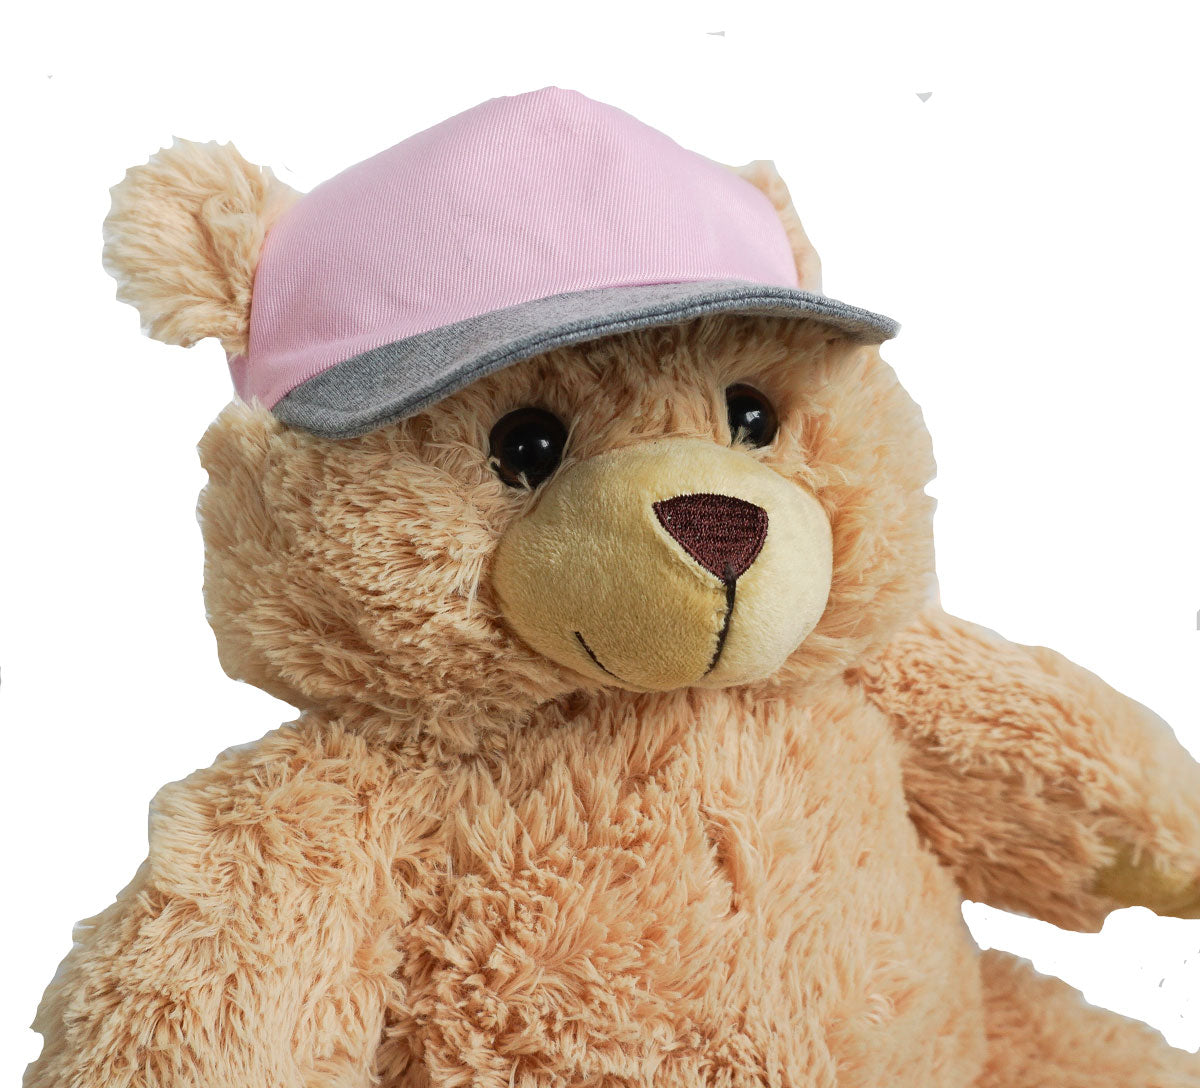 FFCC Clothes - Pink and Grey Baseball Cap for 16" Stuffed Animal